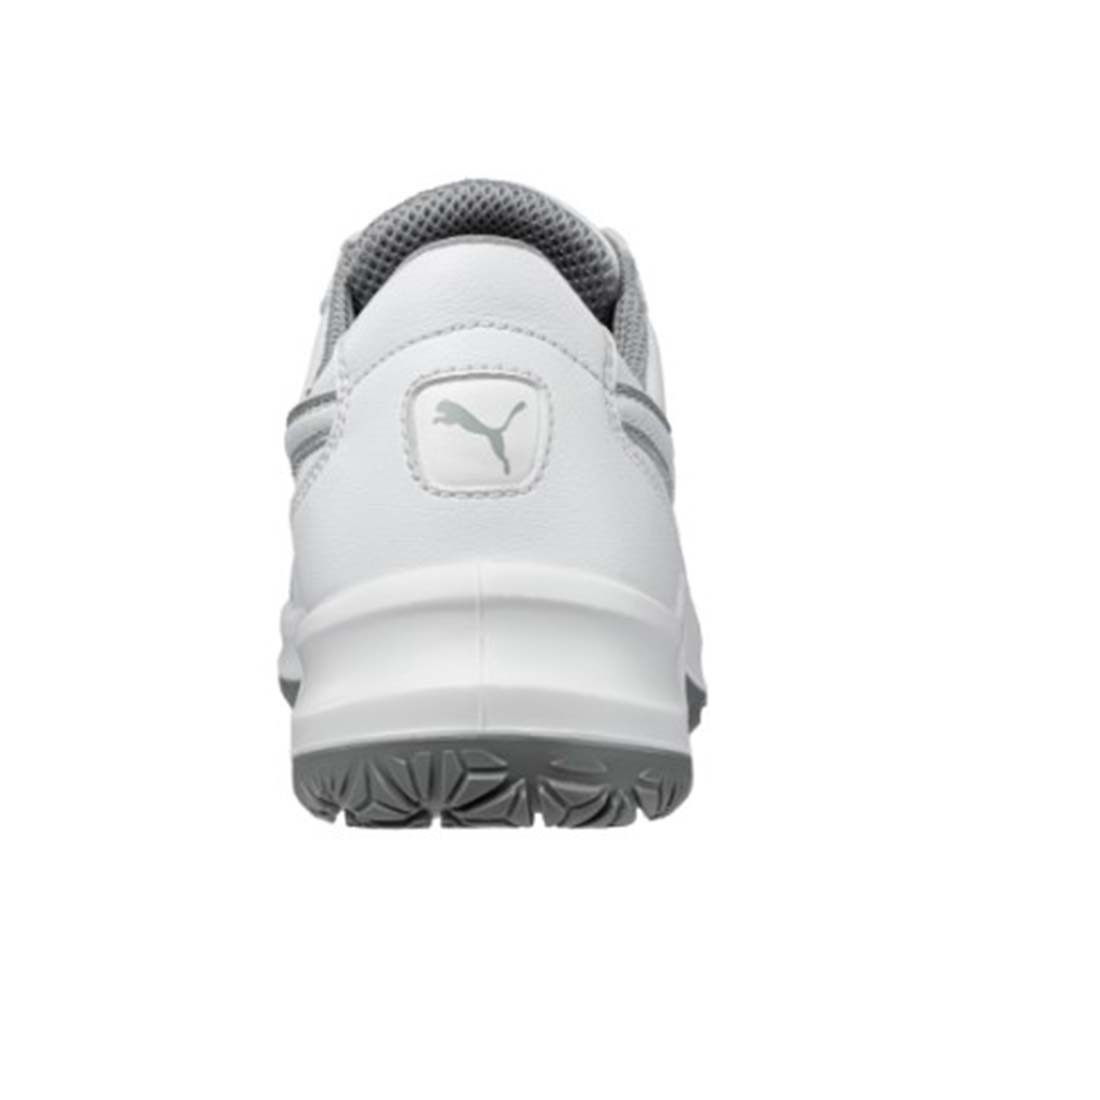 Puma S2 Clarity Unisex Protection Shoes - Footwear